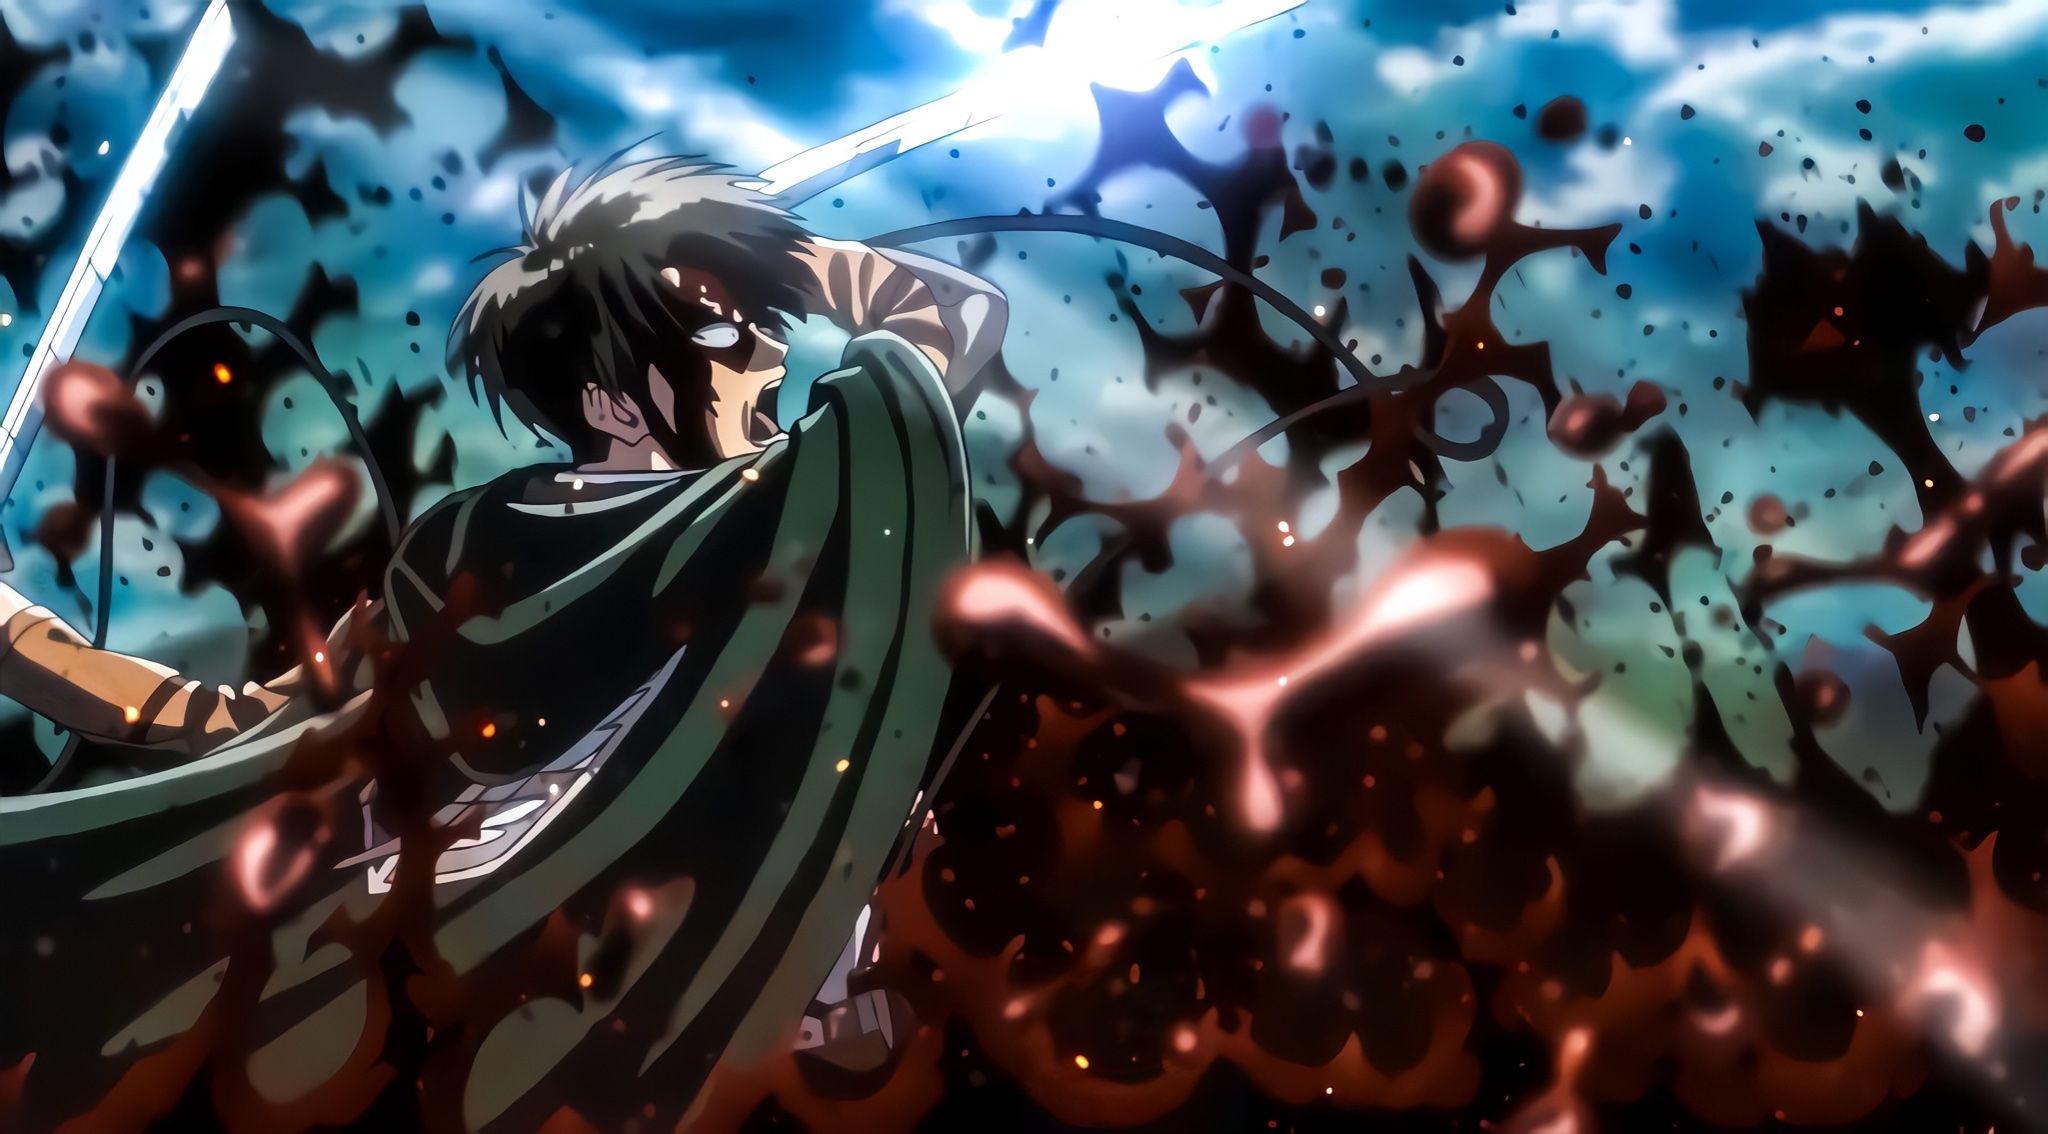 Levi Attack on Titan 4K iPhone Wallpapers Free Download